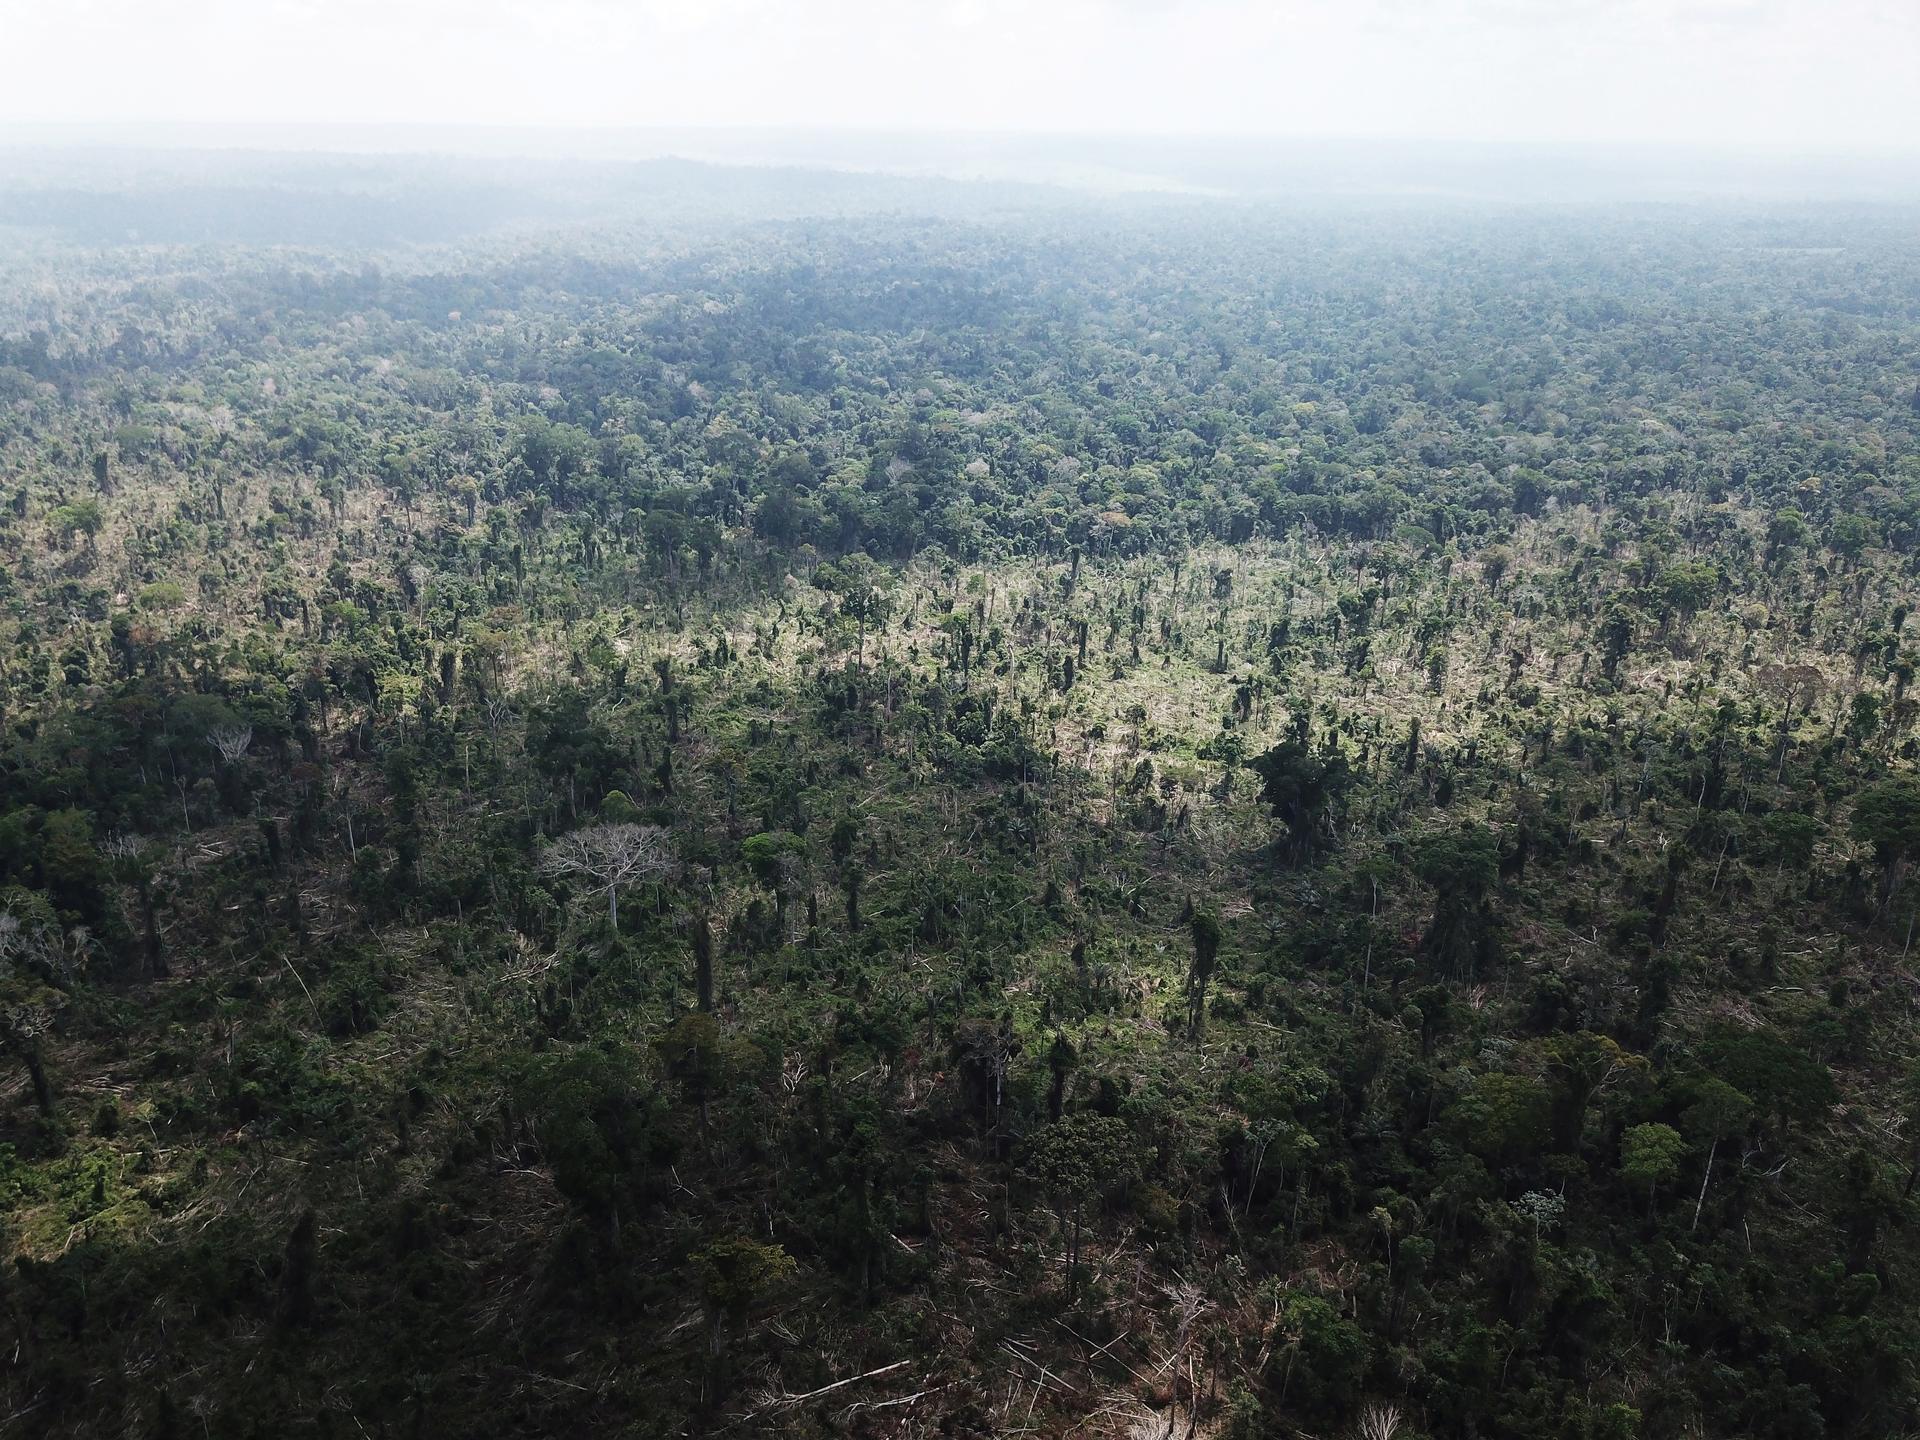 An aerial view of the Amazon with a portion cleared.